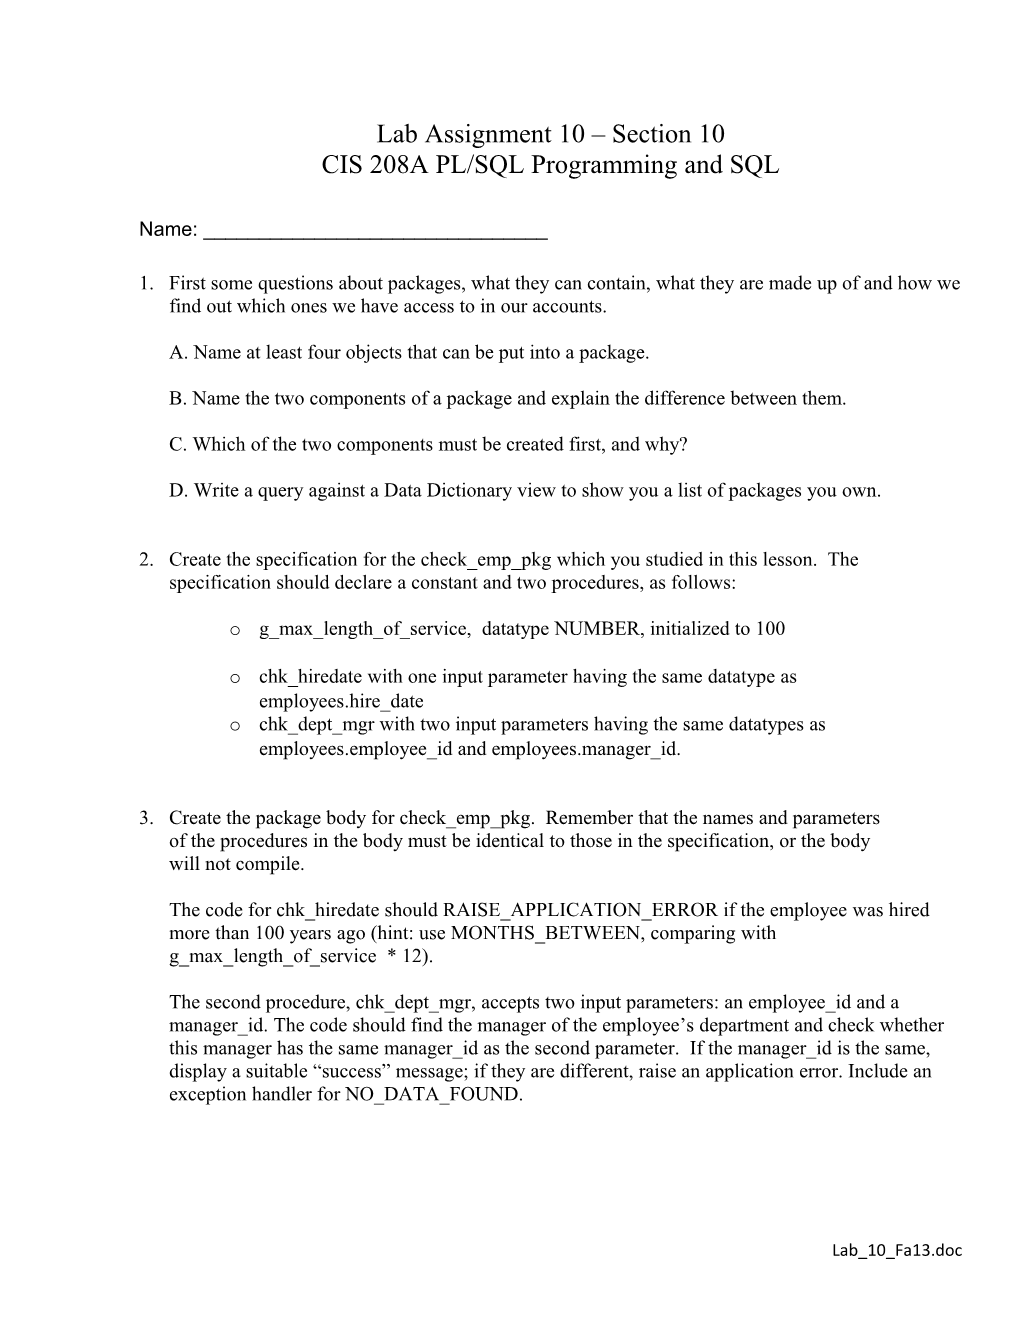 Lab Assignment 10 Section 10 CIS 208A PL/SQL Programming and SQL